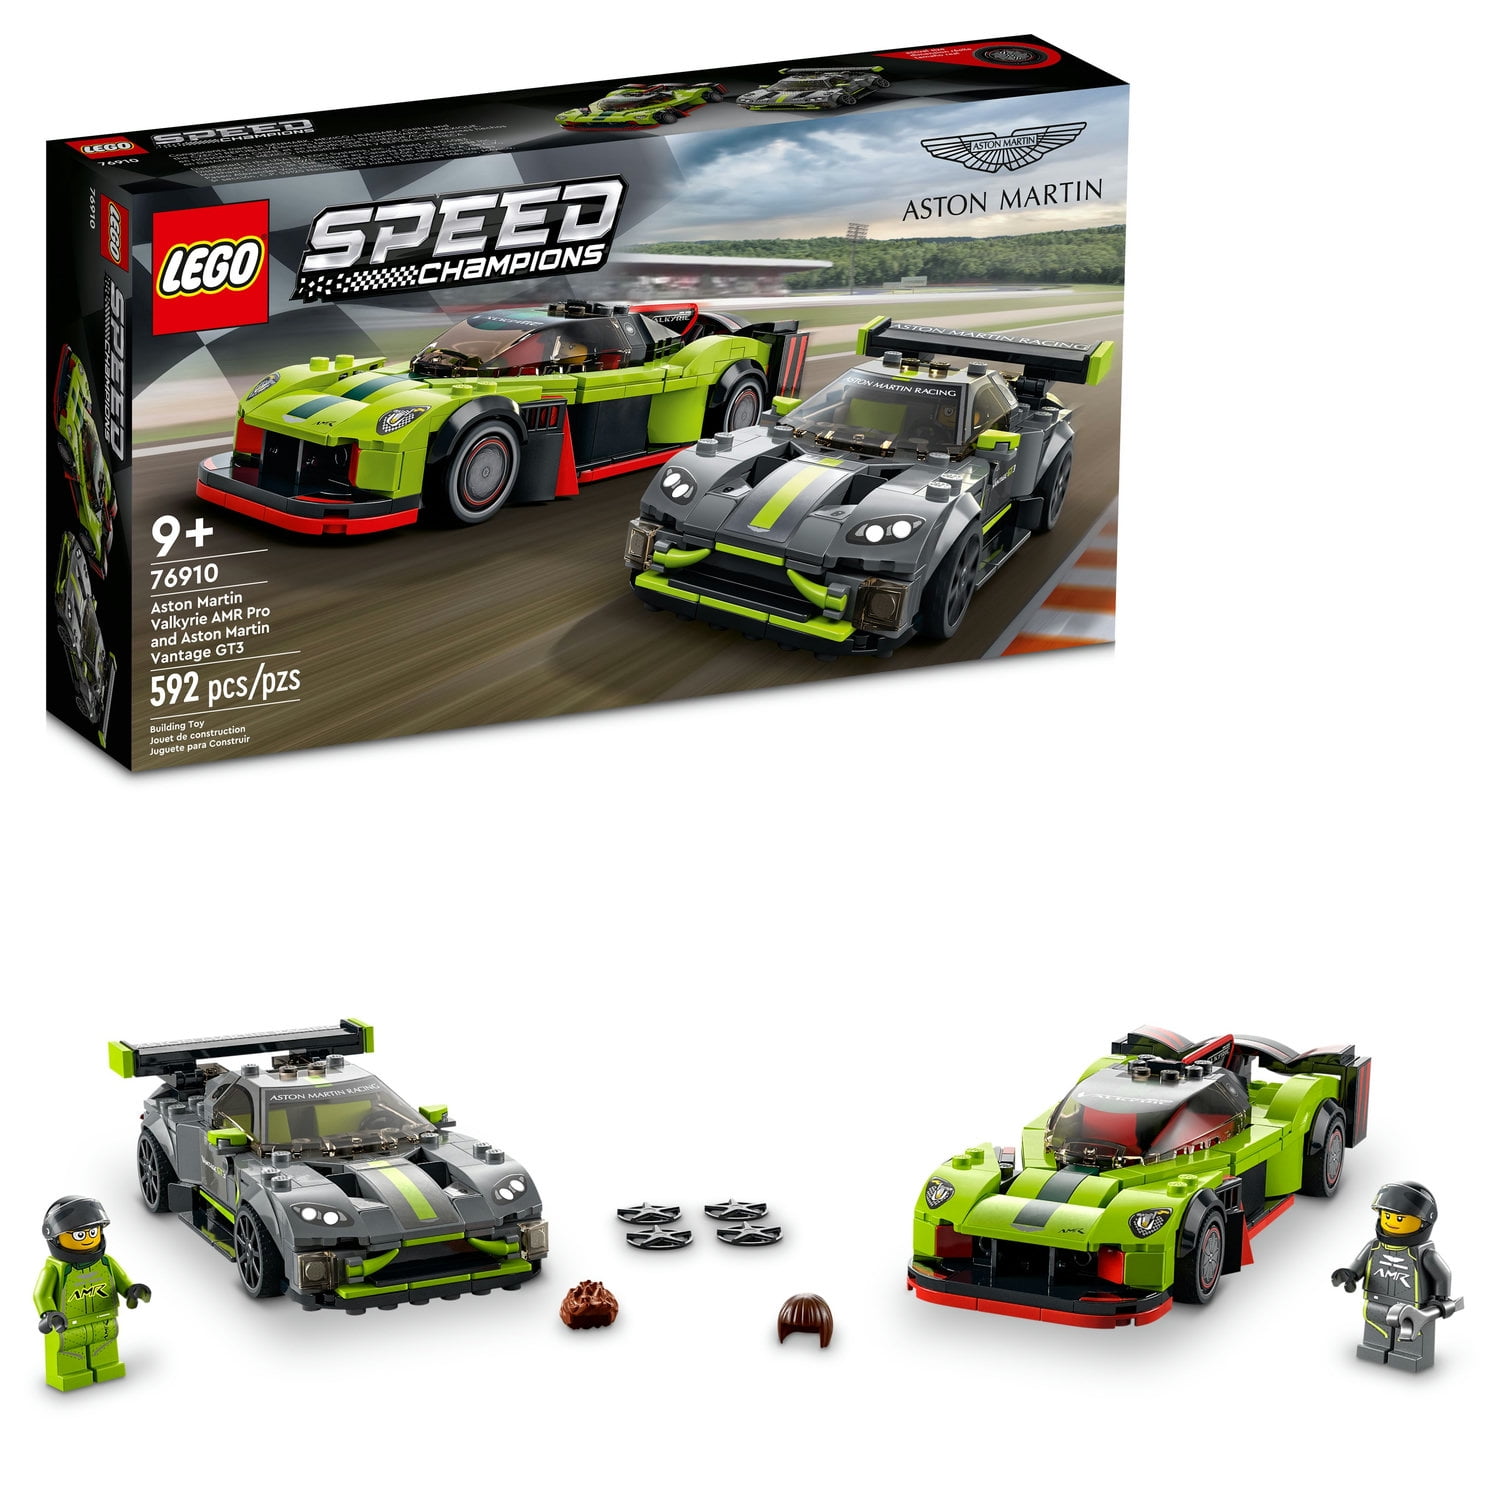 Discontinued by Manufacturer 183 Pieces LEGO Speed Champions 1968 Ford Mustang Fastback 75884 Building Kit 